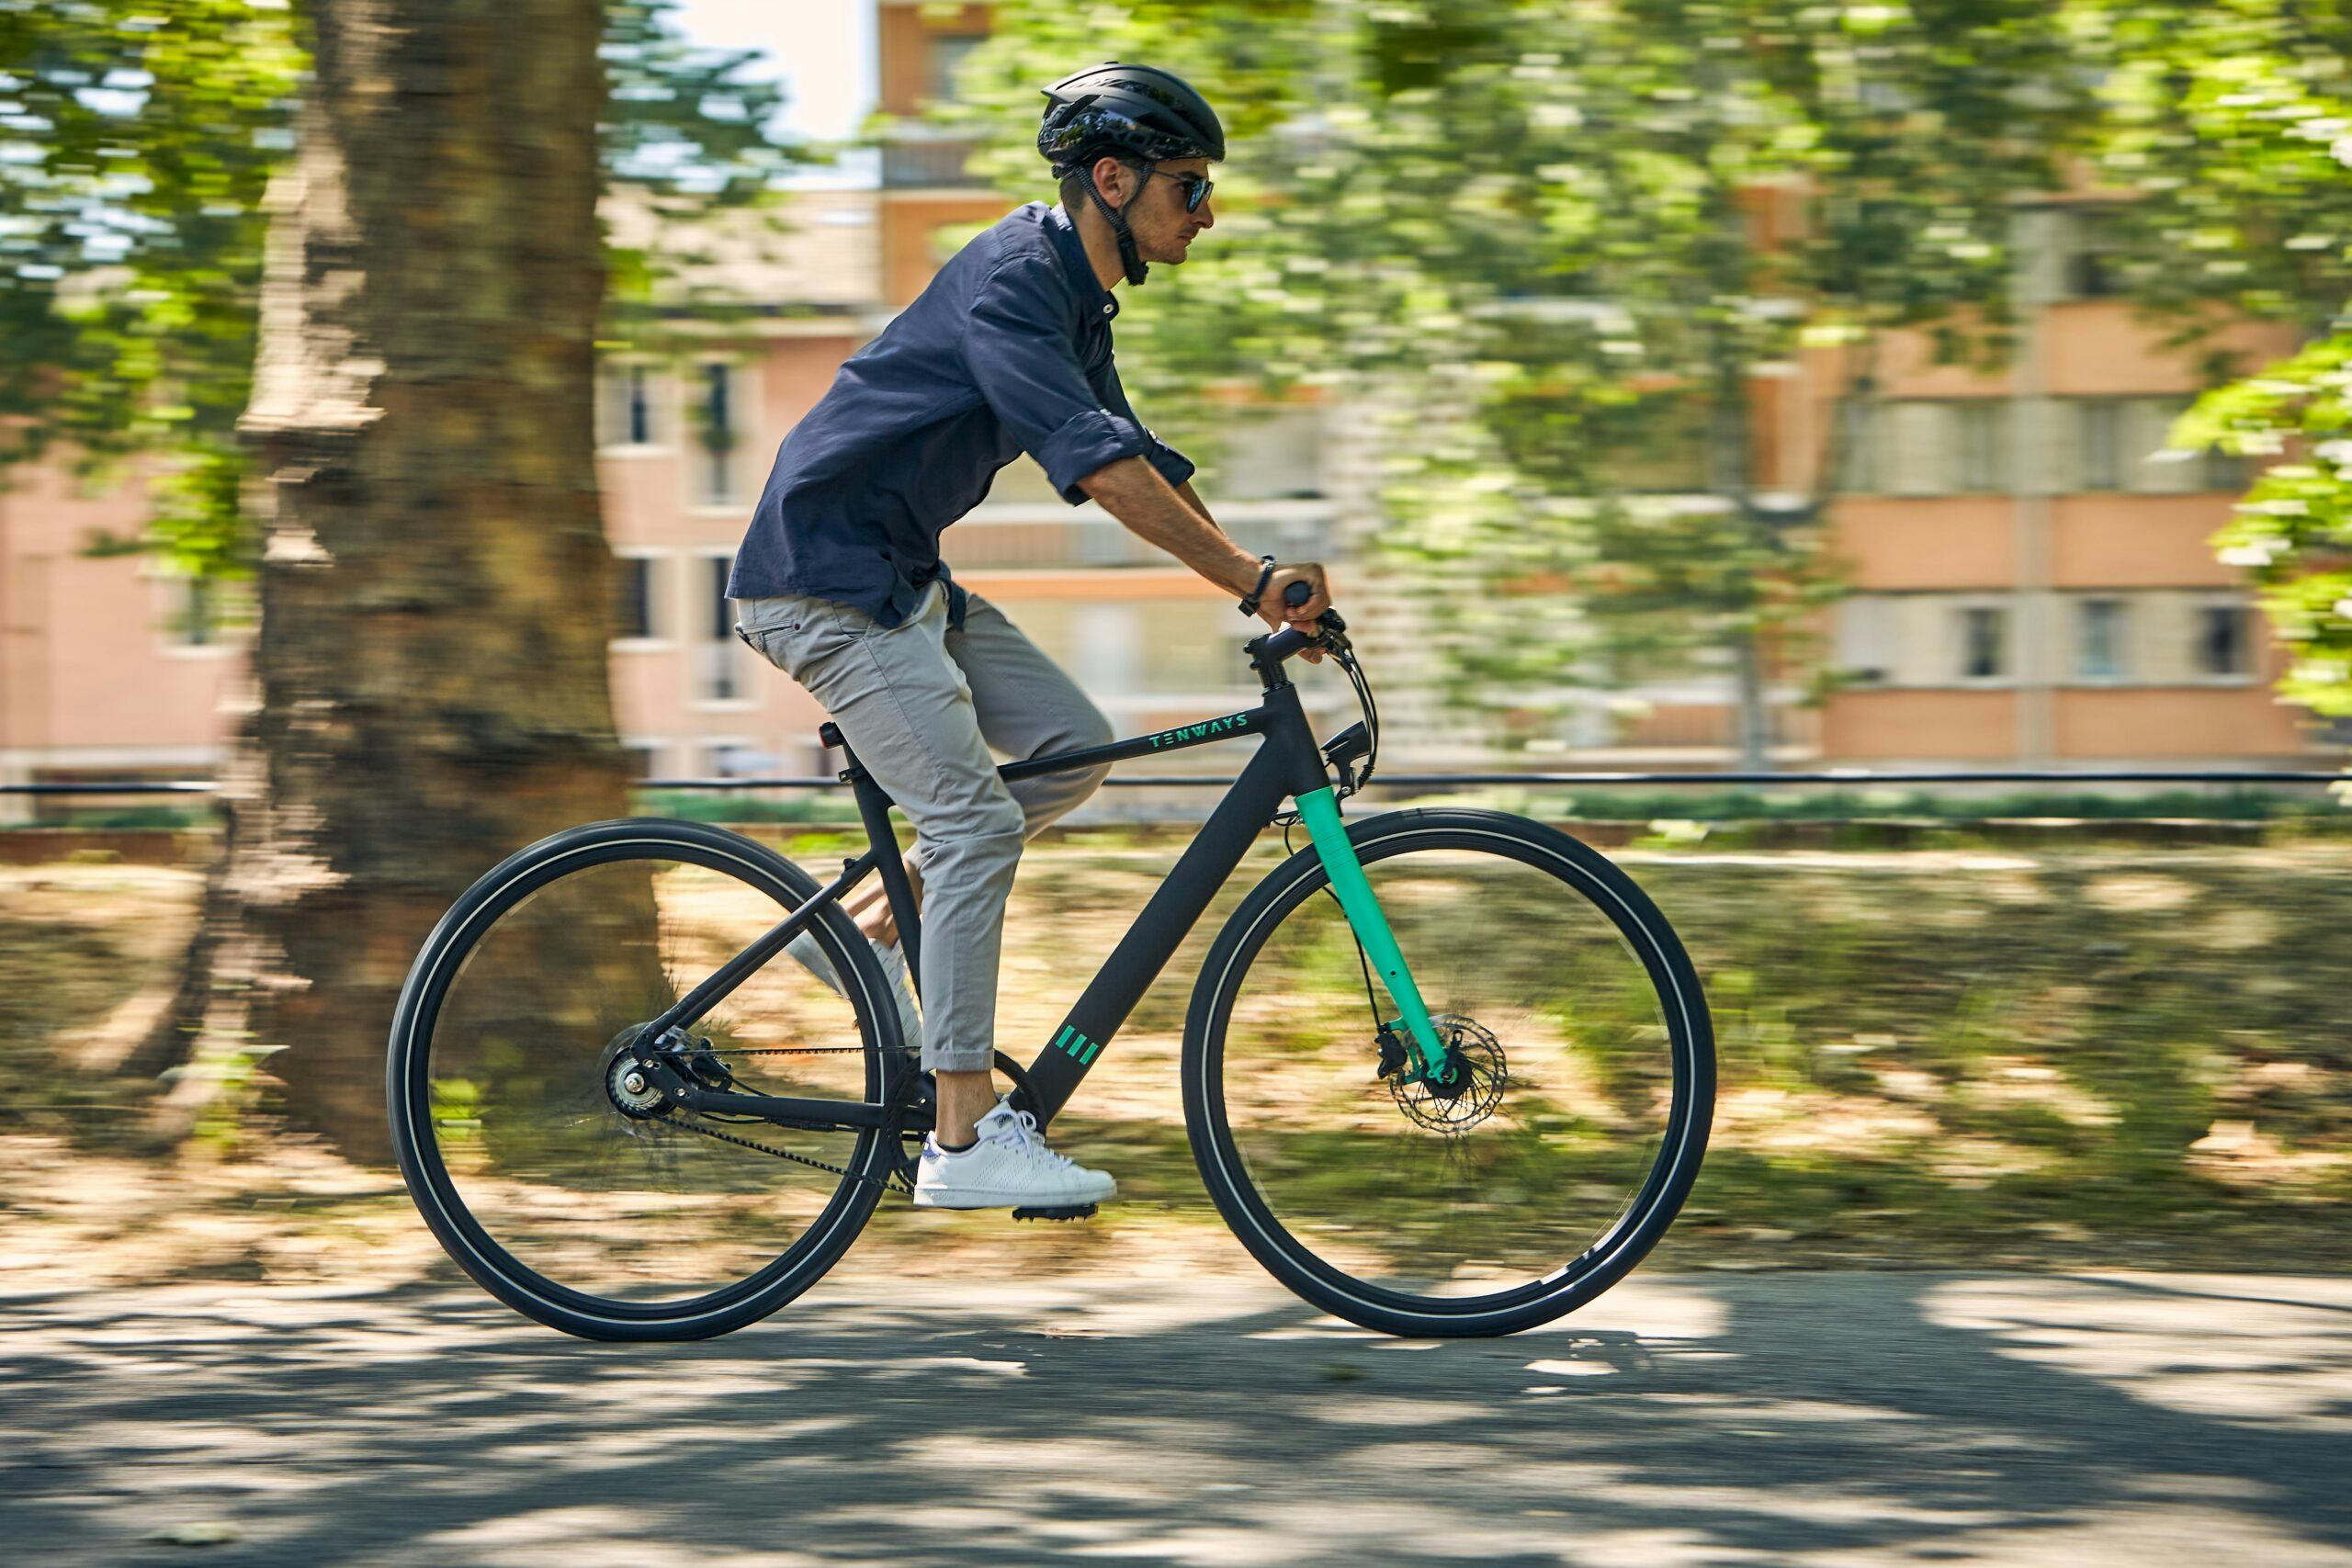 The TENWAYS CGO600 has an ergonomic, aluminum 6061 body, the weight of the whole bike is around 15kg, easily lighter than most comparable e-bikes on market.